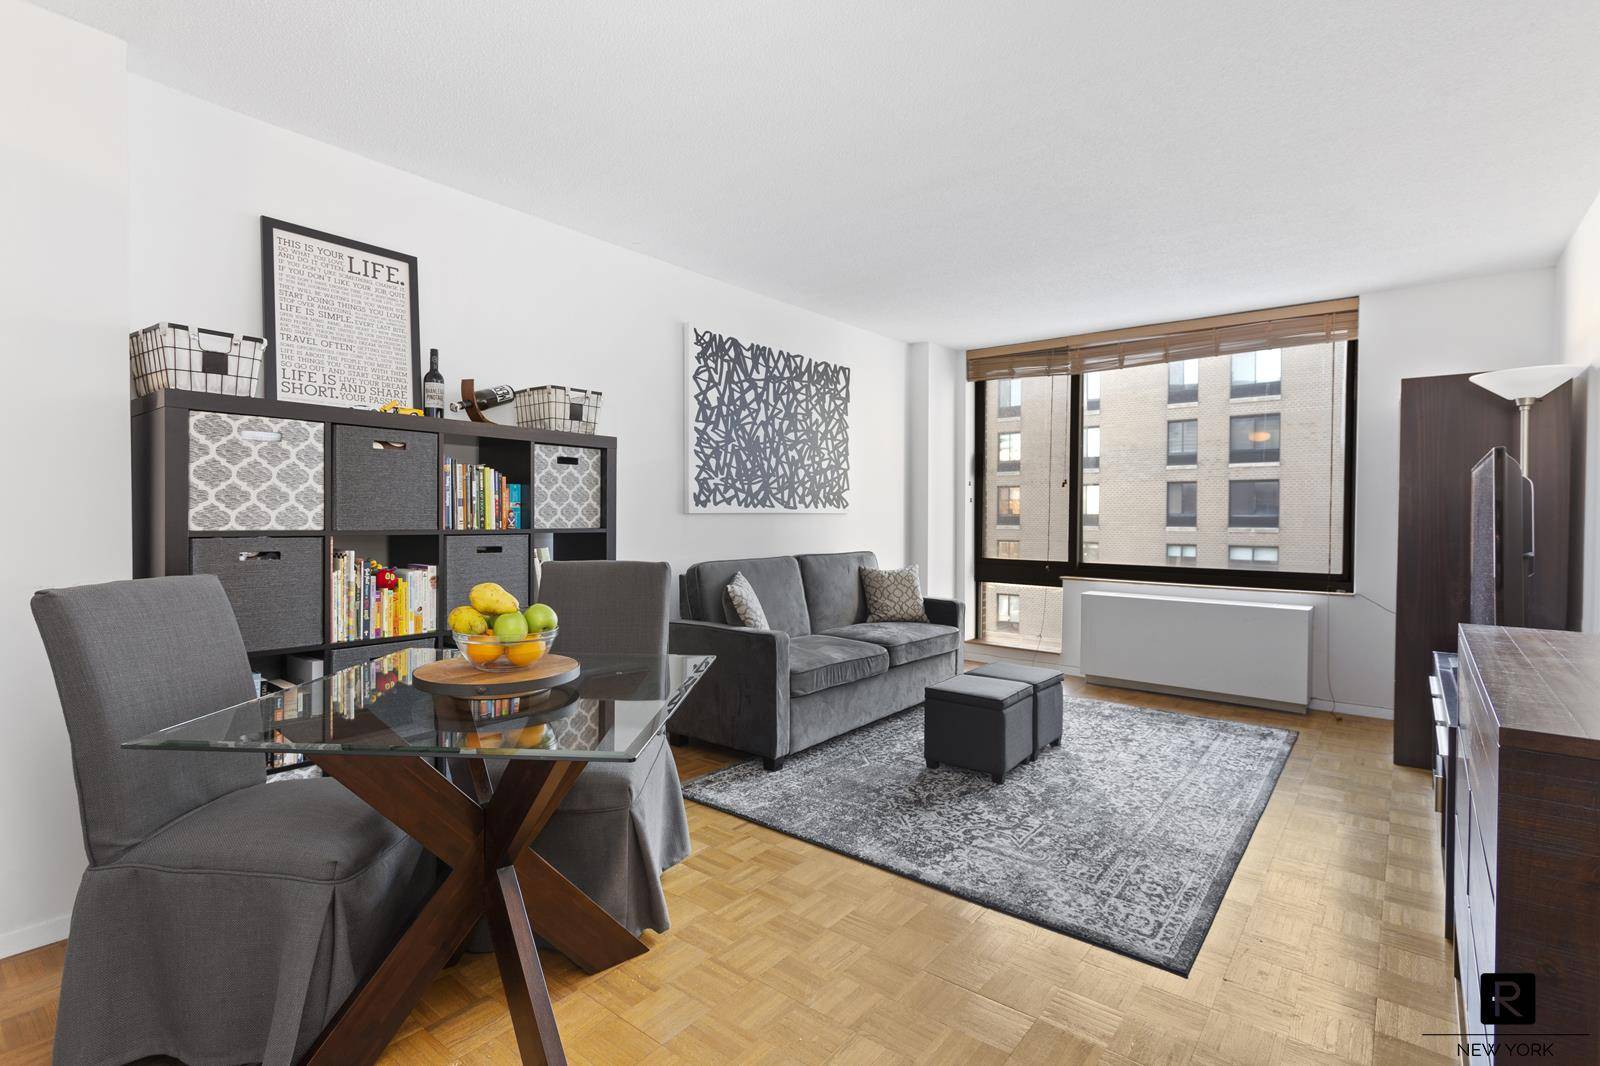 VALUE BUYERS We are pleased to present one of the least expensive, largest true one bedroom with the lowest monthlies in all of Battery Park and Tribeca.